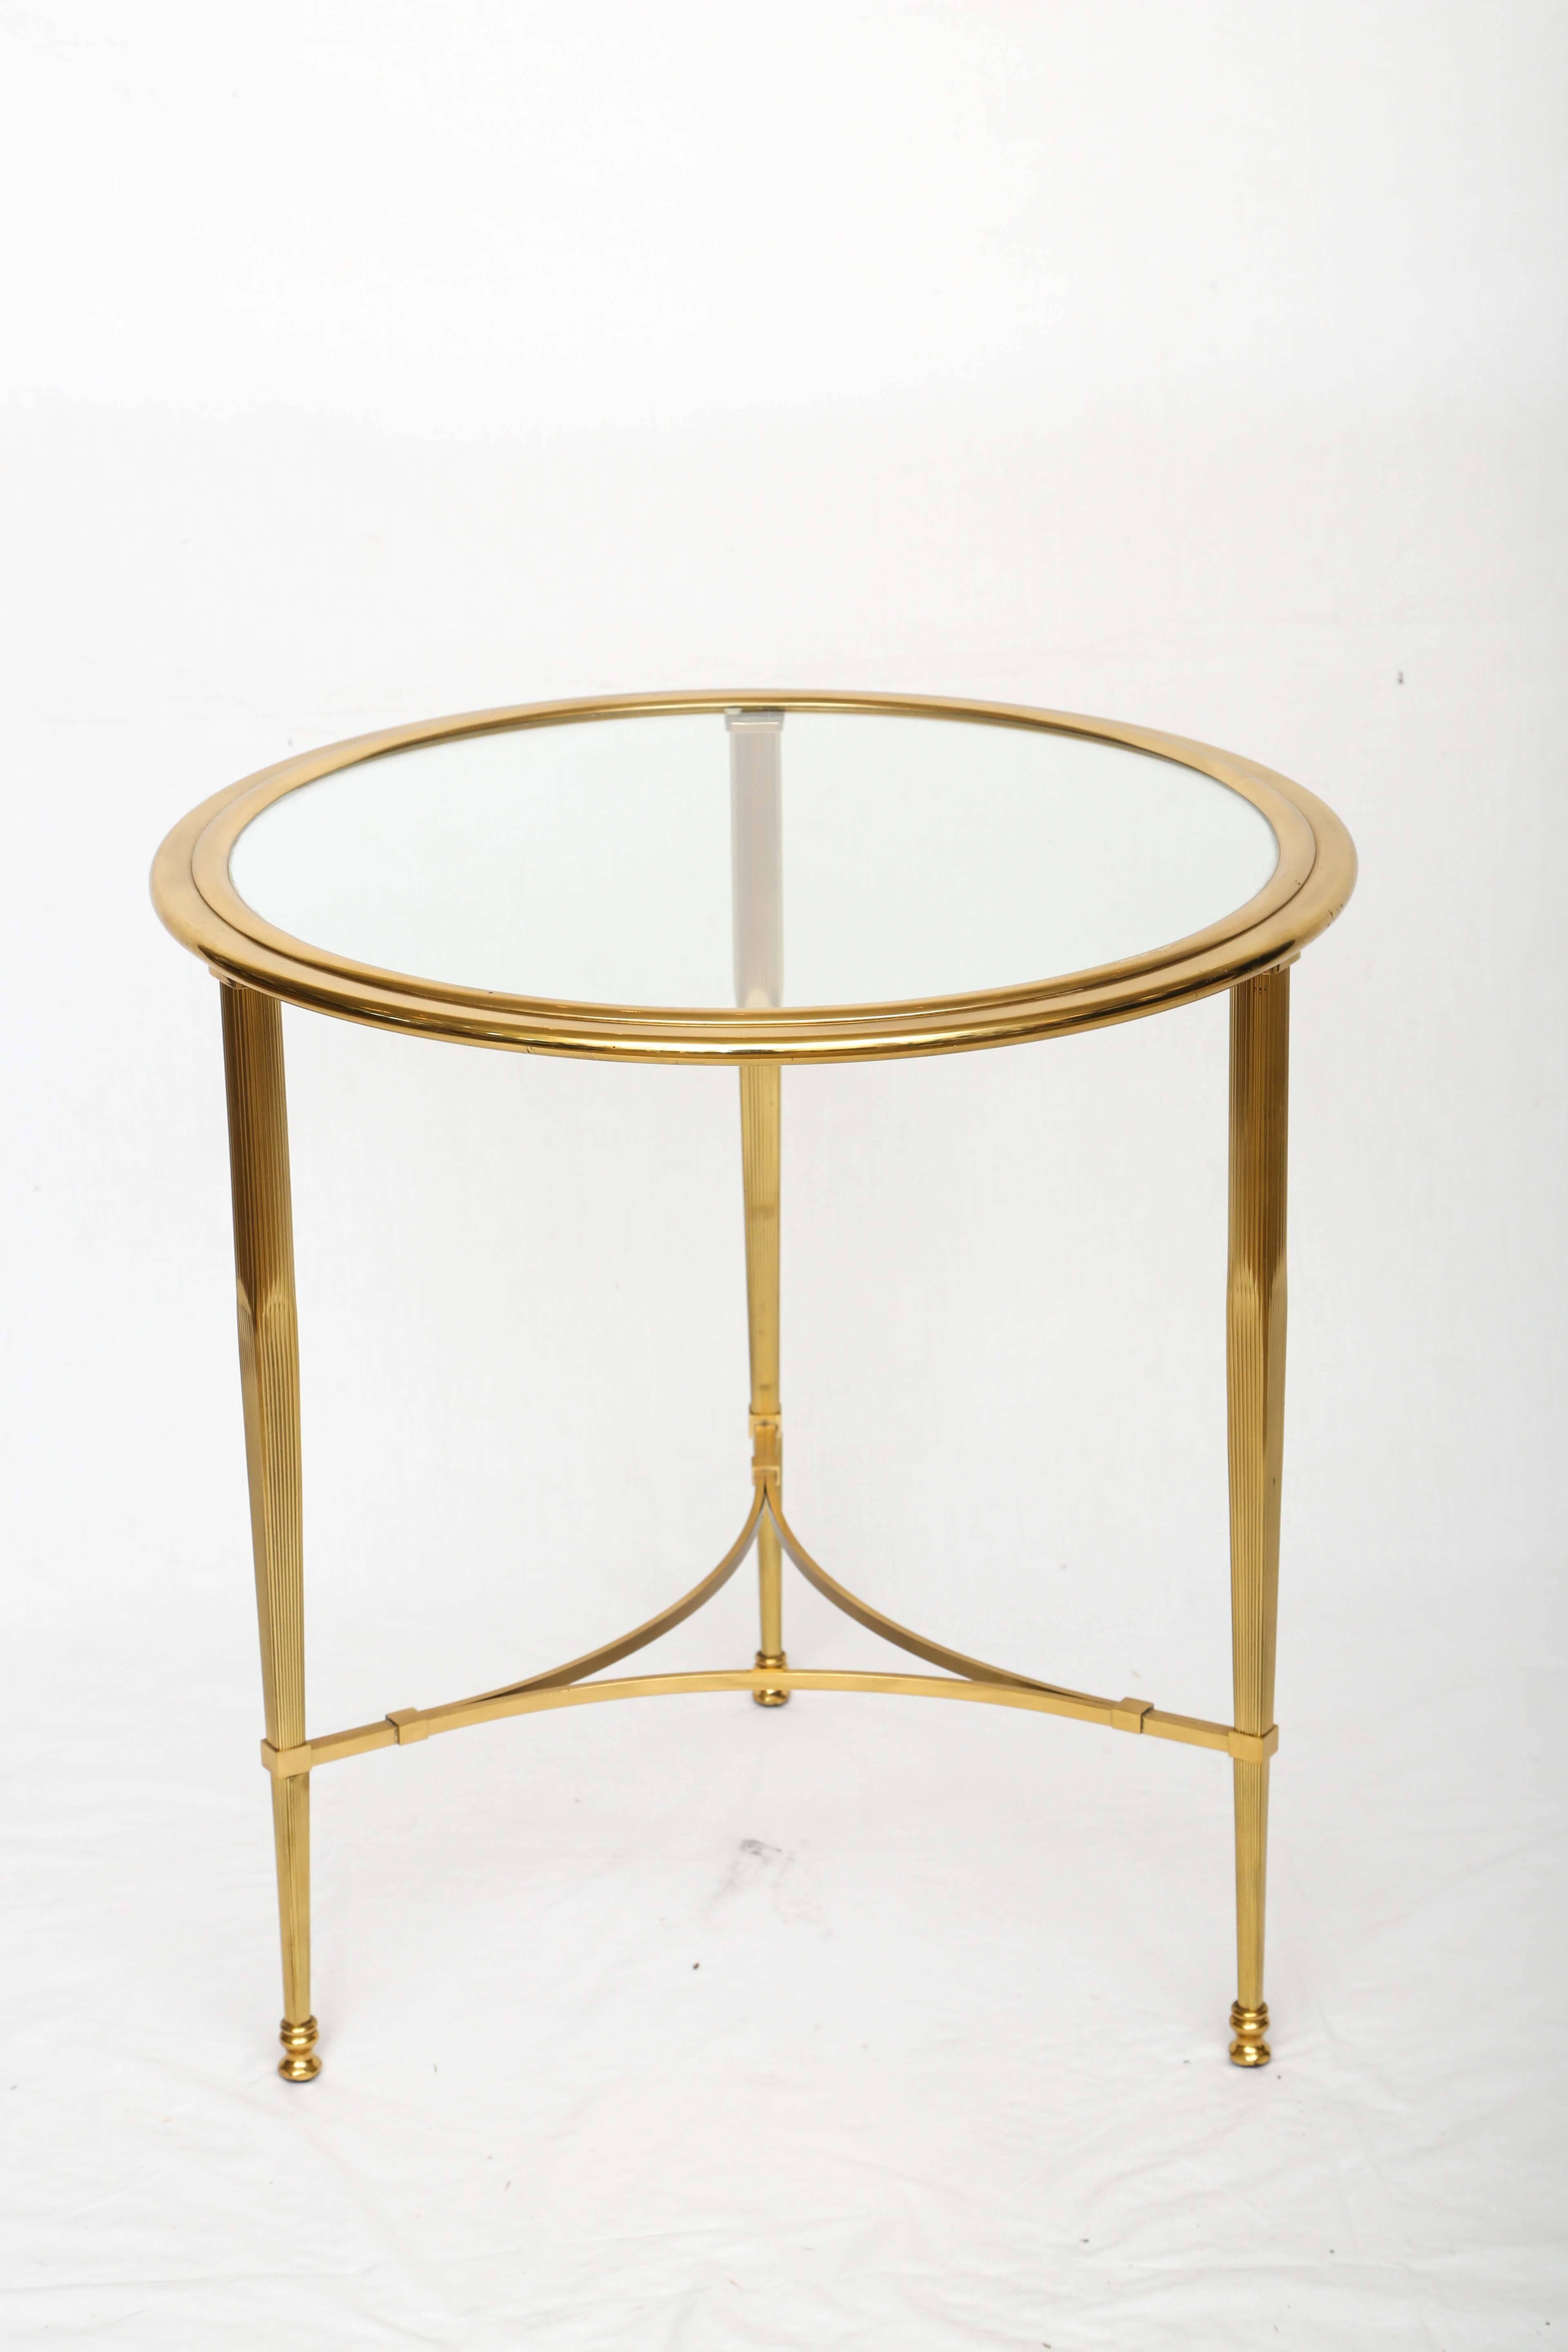 Hollywood Regency bronze glass top side table with a very decorative base.
The glass is inserted into the bronze rim.